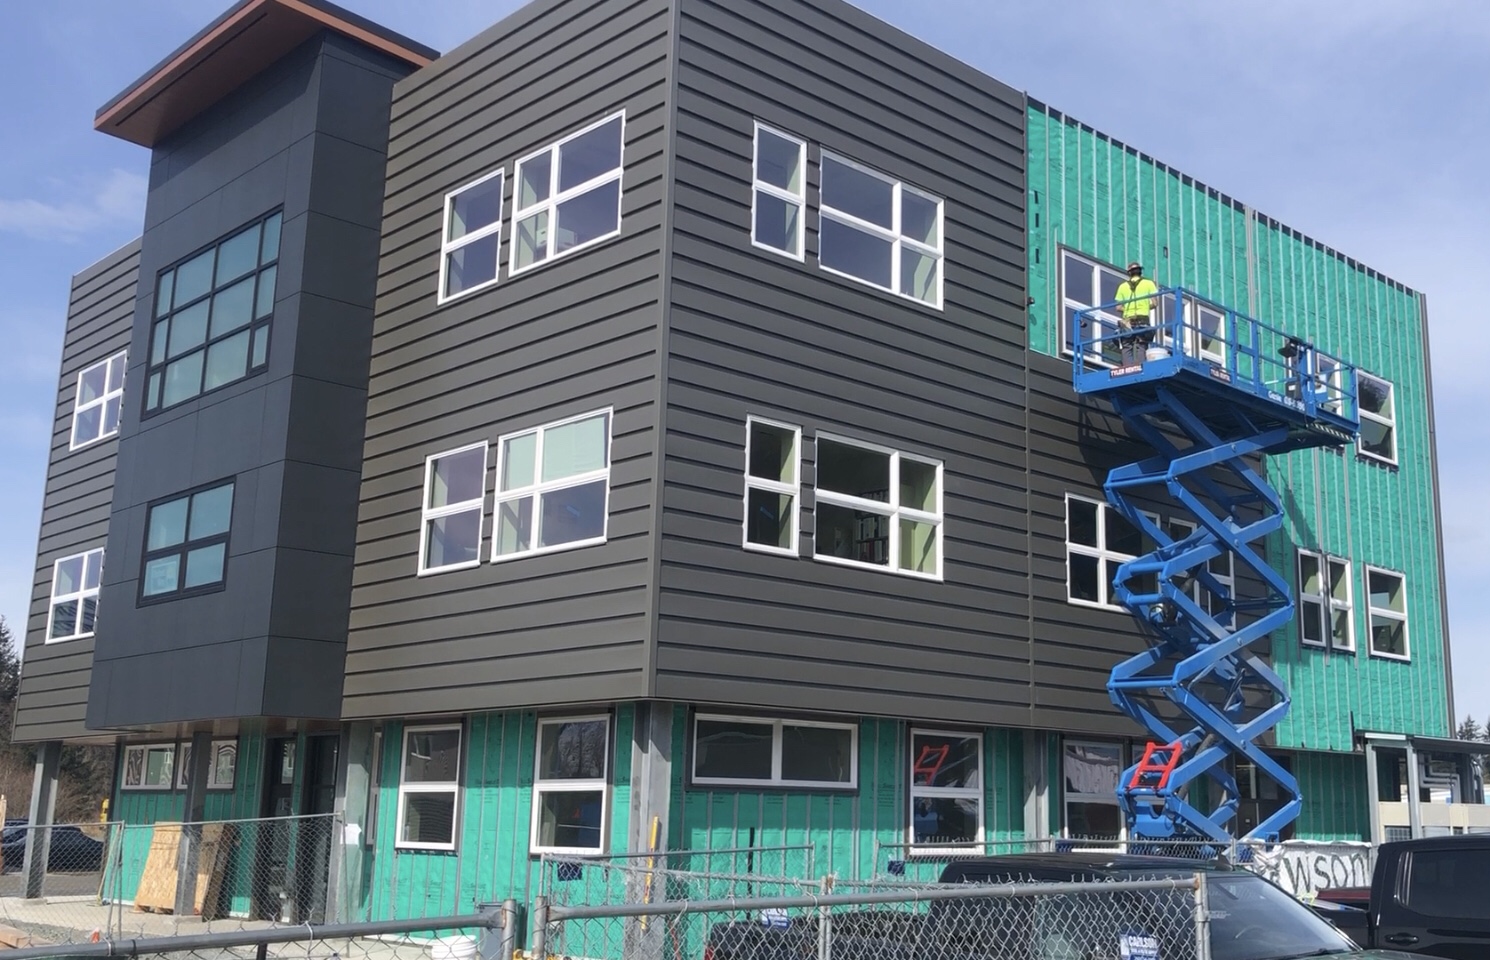 Teal Street Center in progress. There is grey siding on most of the 3-story building, plus some green board. There's a blue lift with a person standing on it working on the third floor